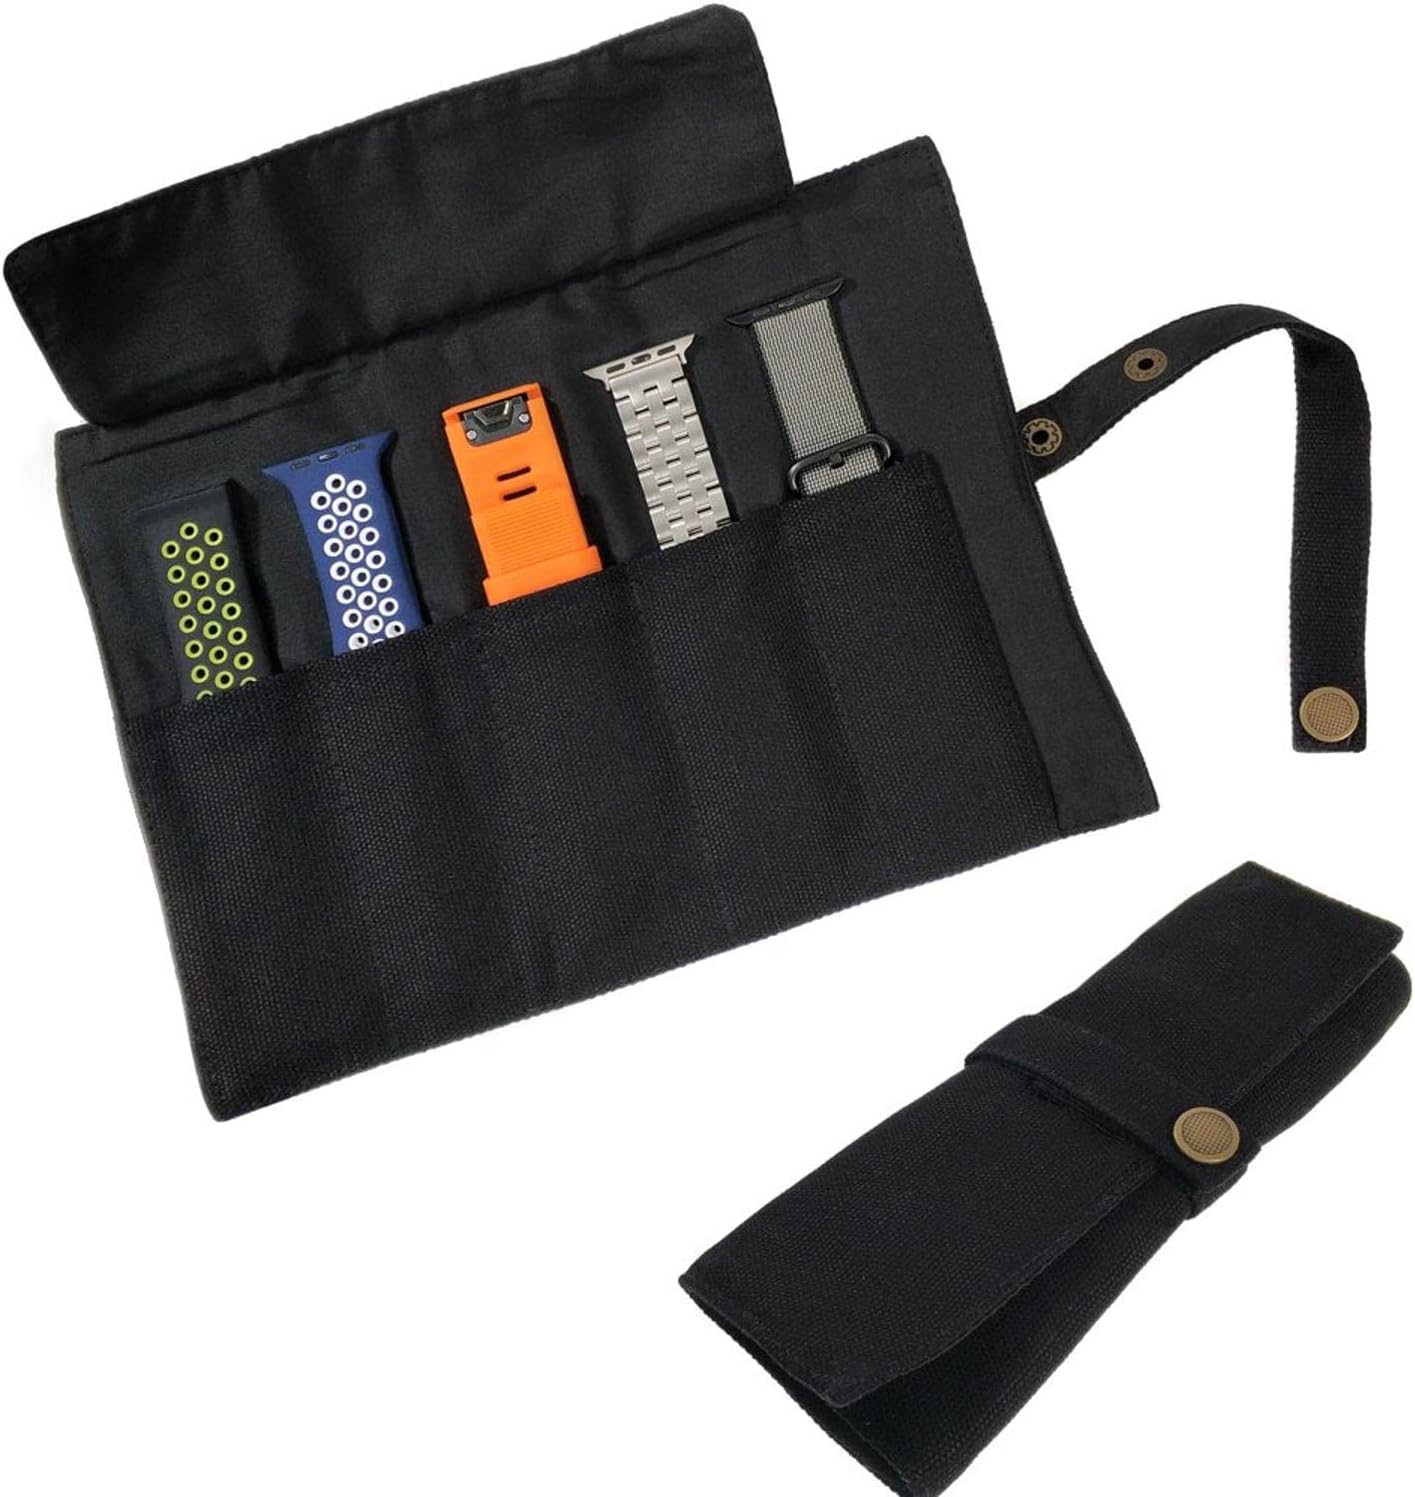 Watch Band Organizer Case for Apple Watch Ultra Travel Pouch